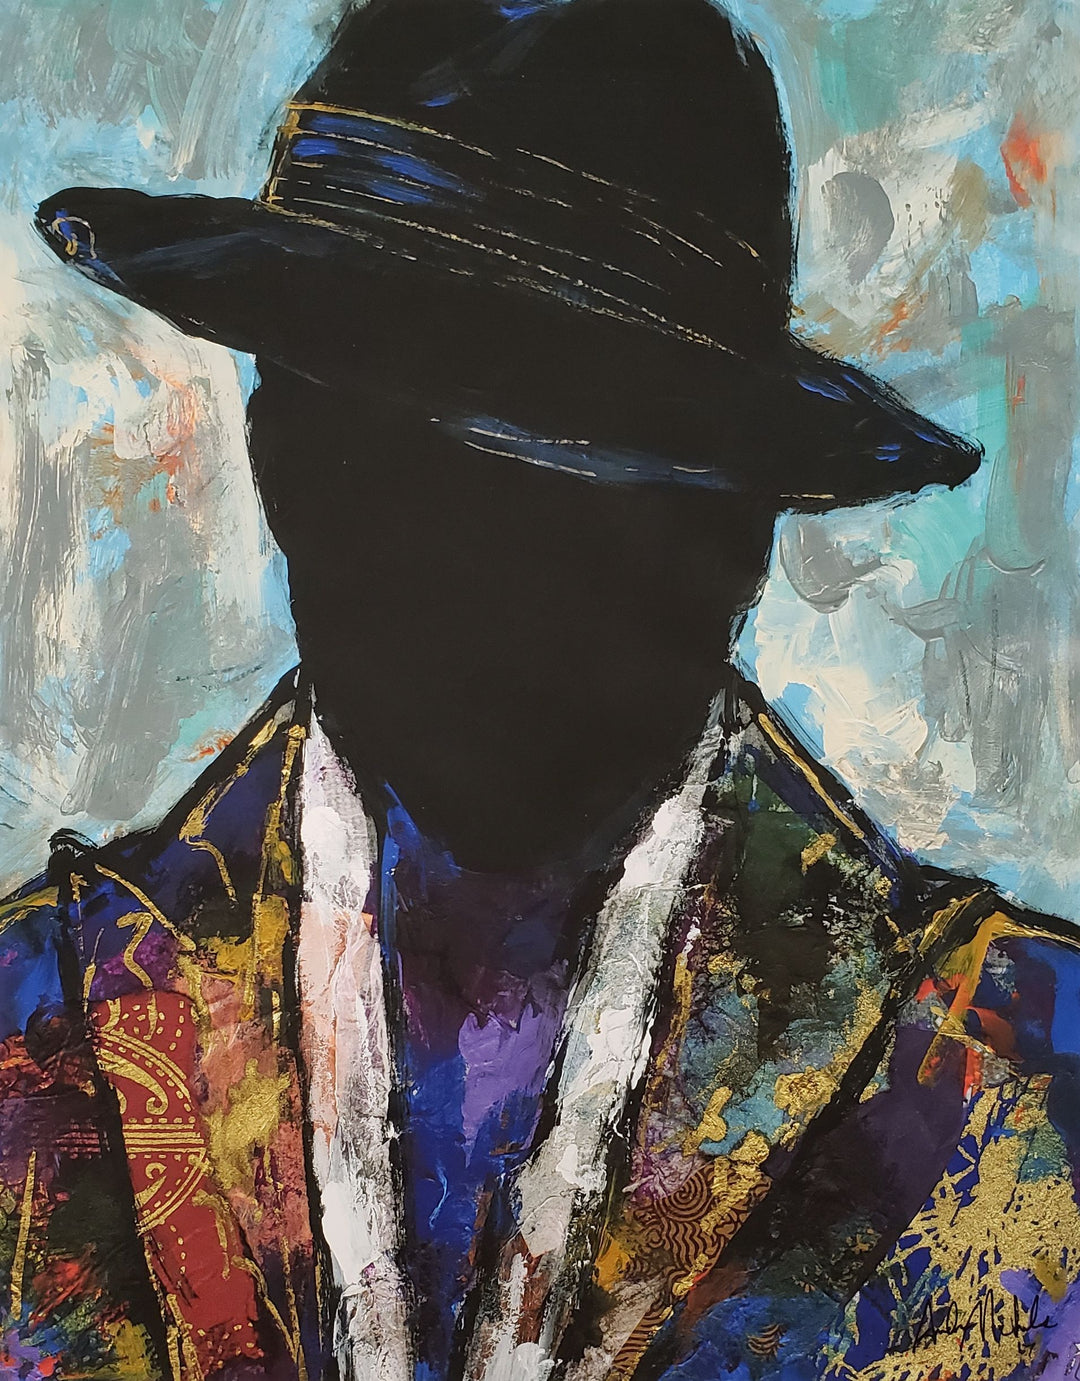 The Man in the Hat by Andrew Nichols – The Black Art Depot